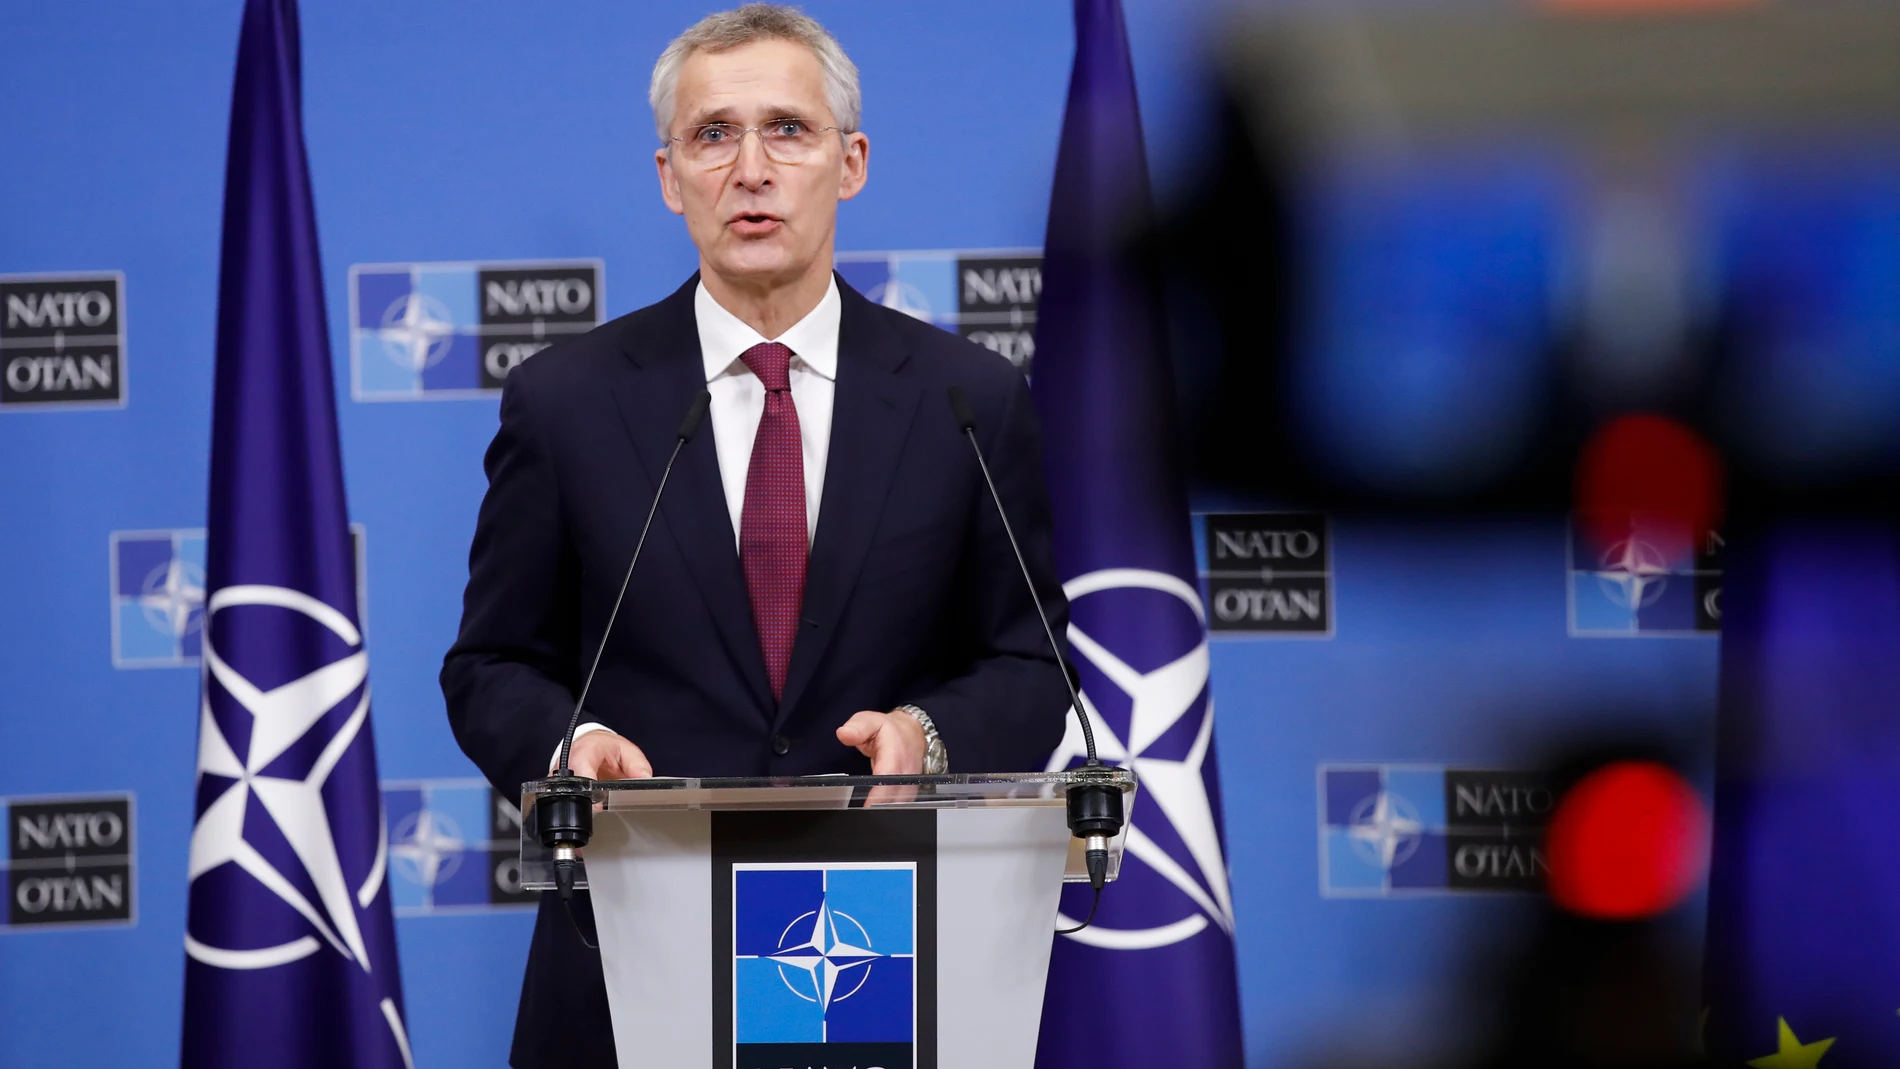 Brussels (Belgium), 21/02/2023.- NATO Secretary General Jens Stoltenberg attends a press conference following a meeting at Alliance headquarters in Brussels, Belgium, 21 February 2023. (Bélgica, Ucrania, Bruselas) EFE/EPA/OLIVIER HOSLET